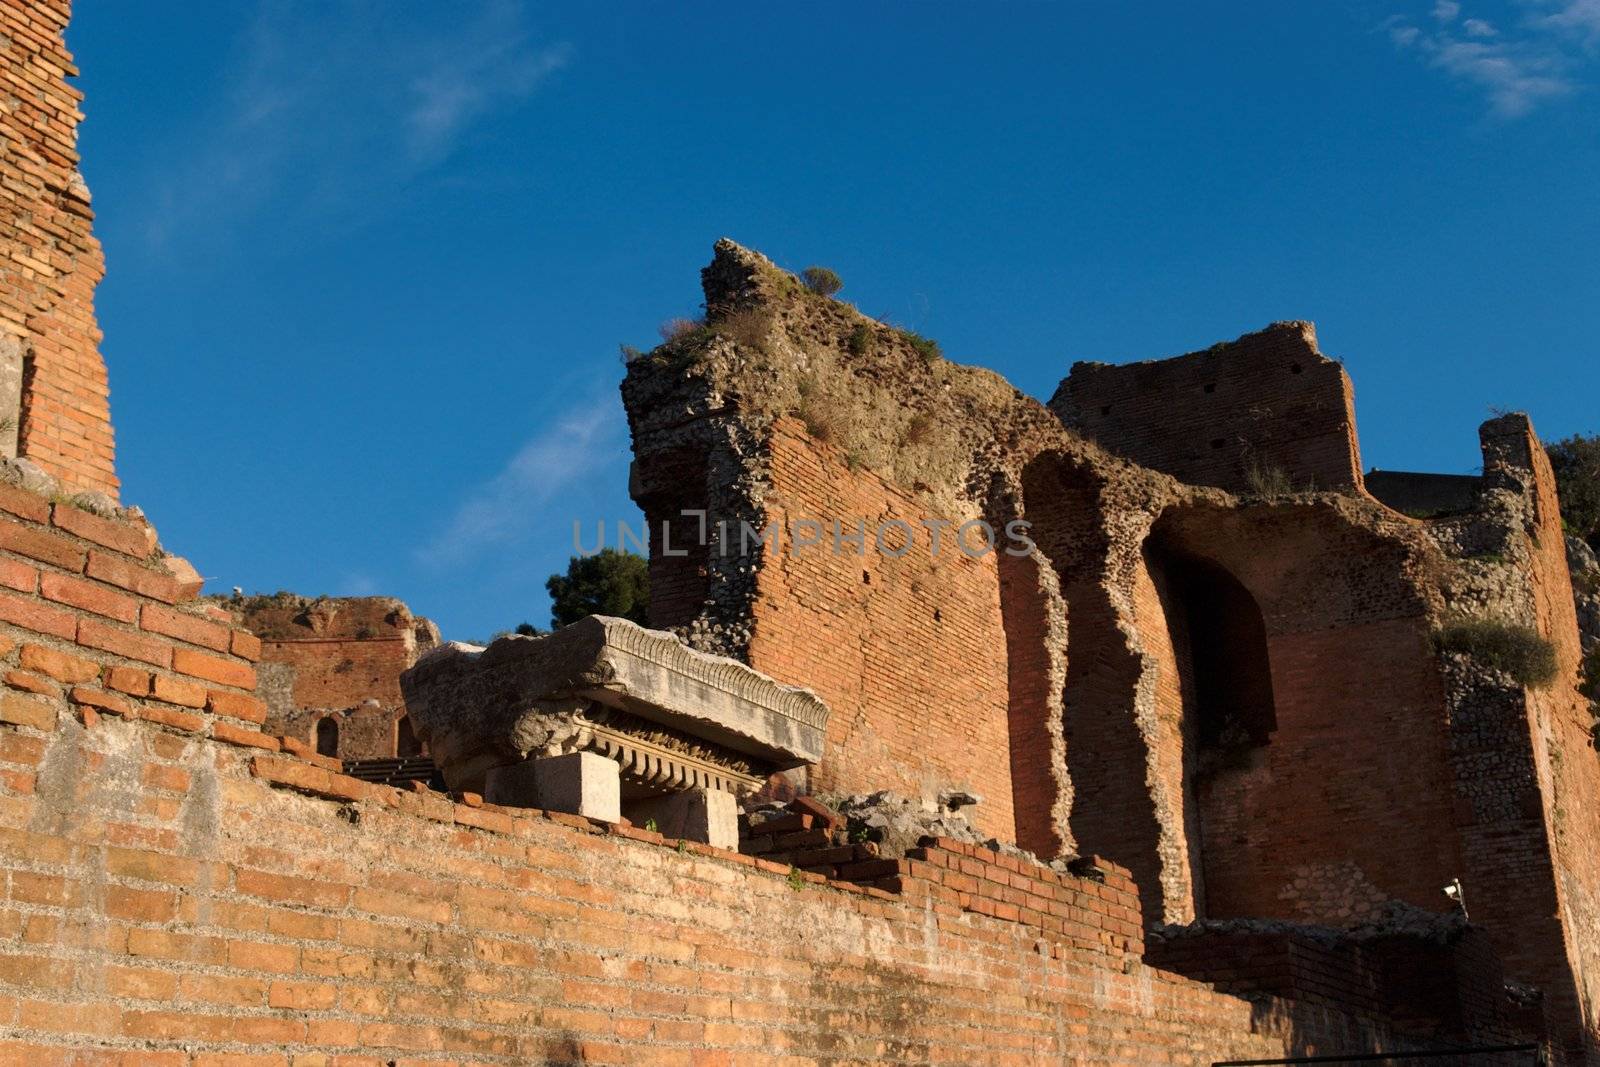 Ruins of ancient Greek and Roman theater in Taormina, Sicily, Italy